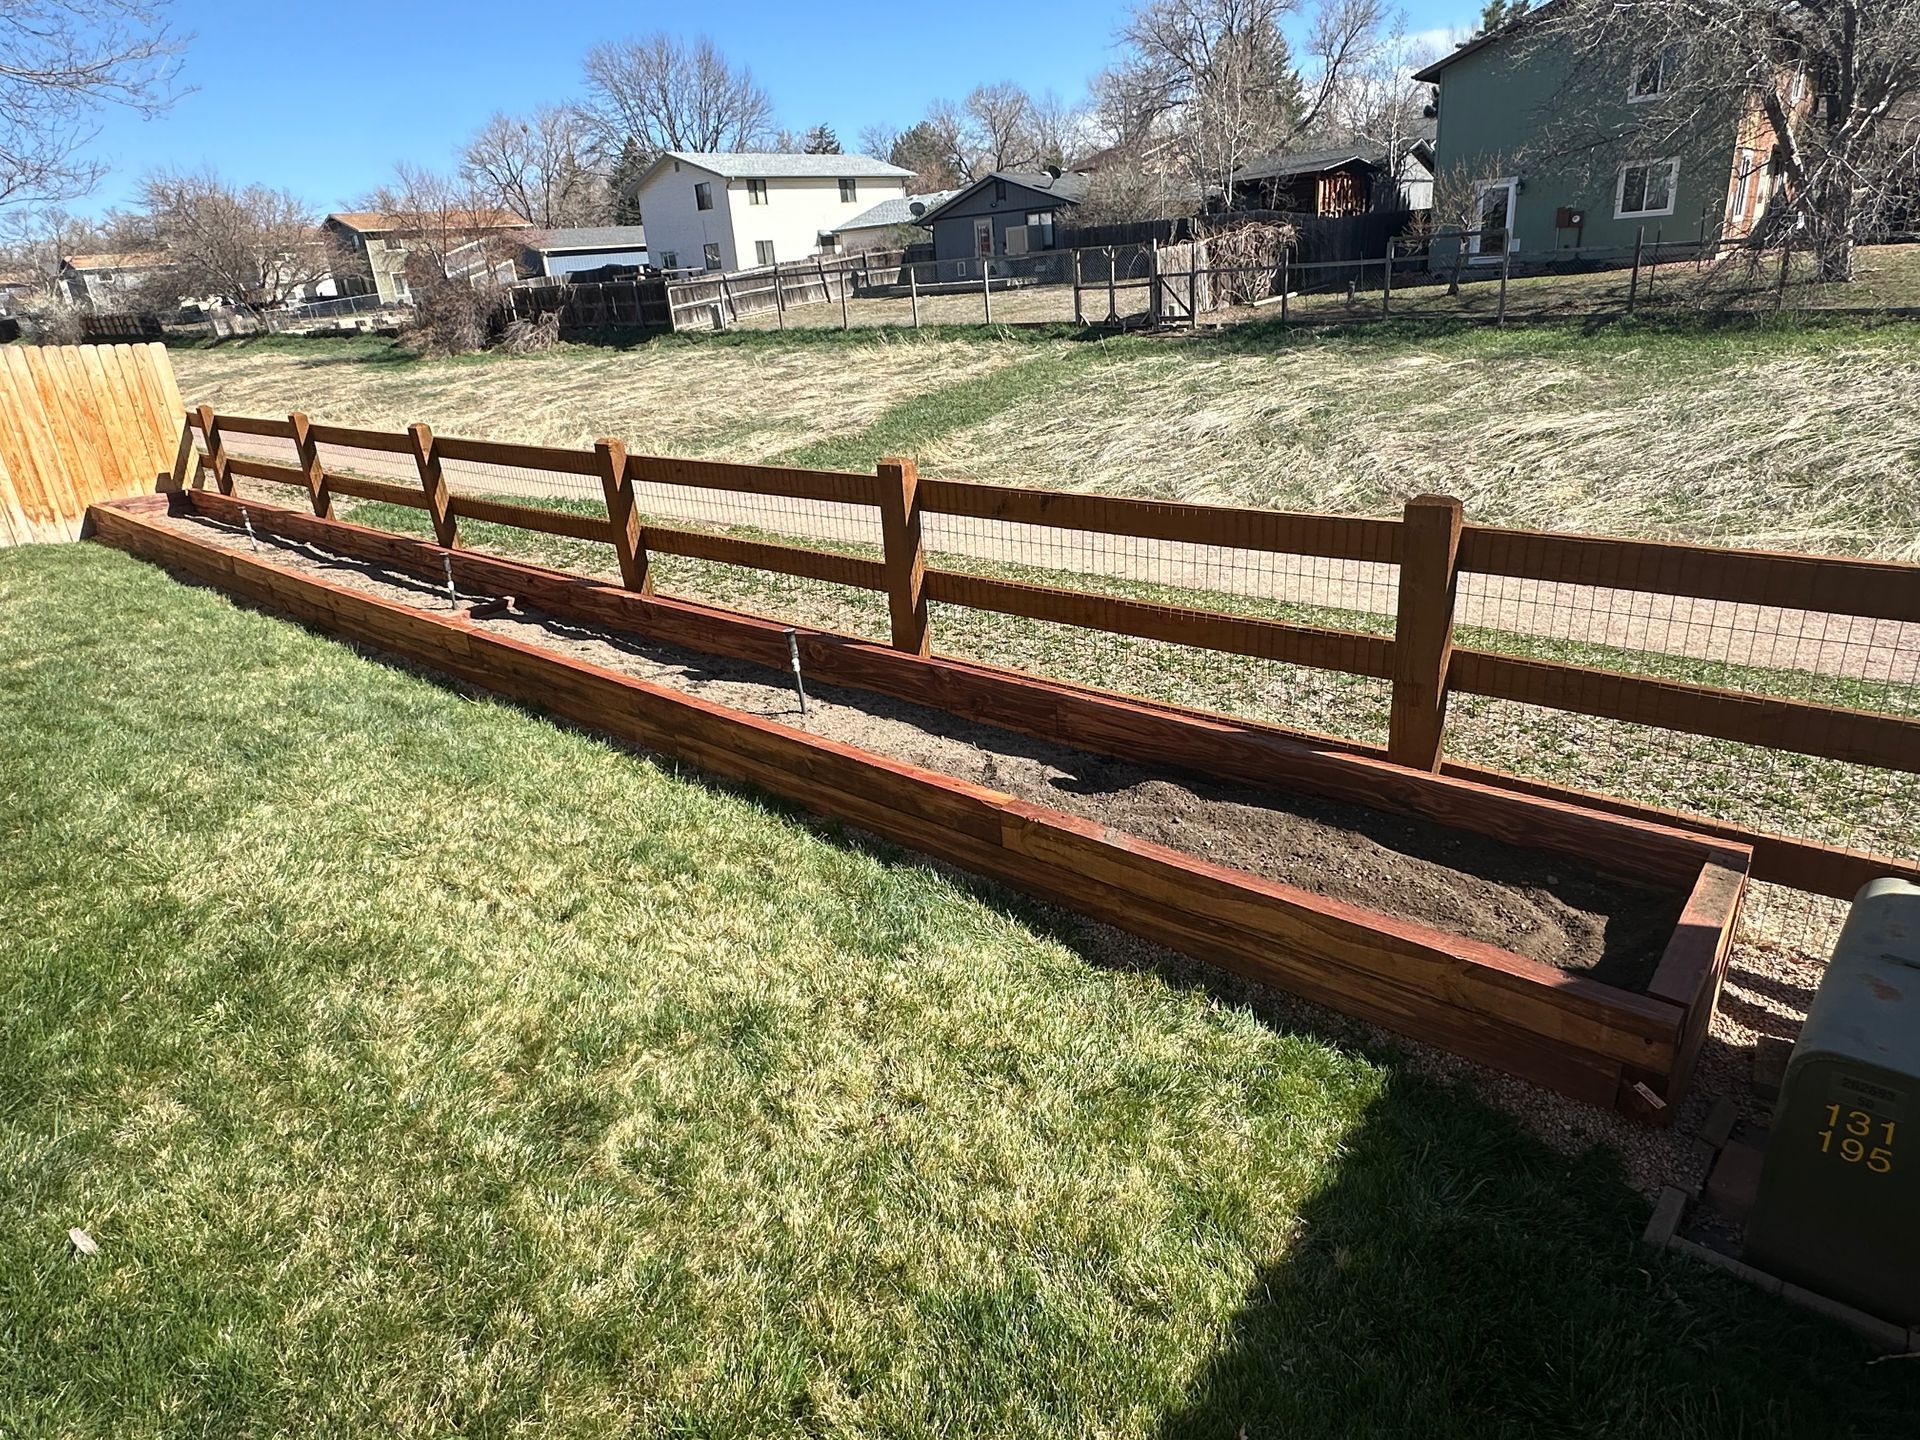 A wooden fence is sitting in the middle of a grassy field.